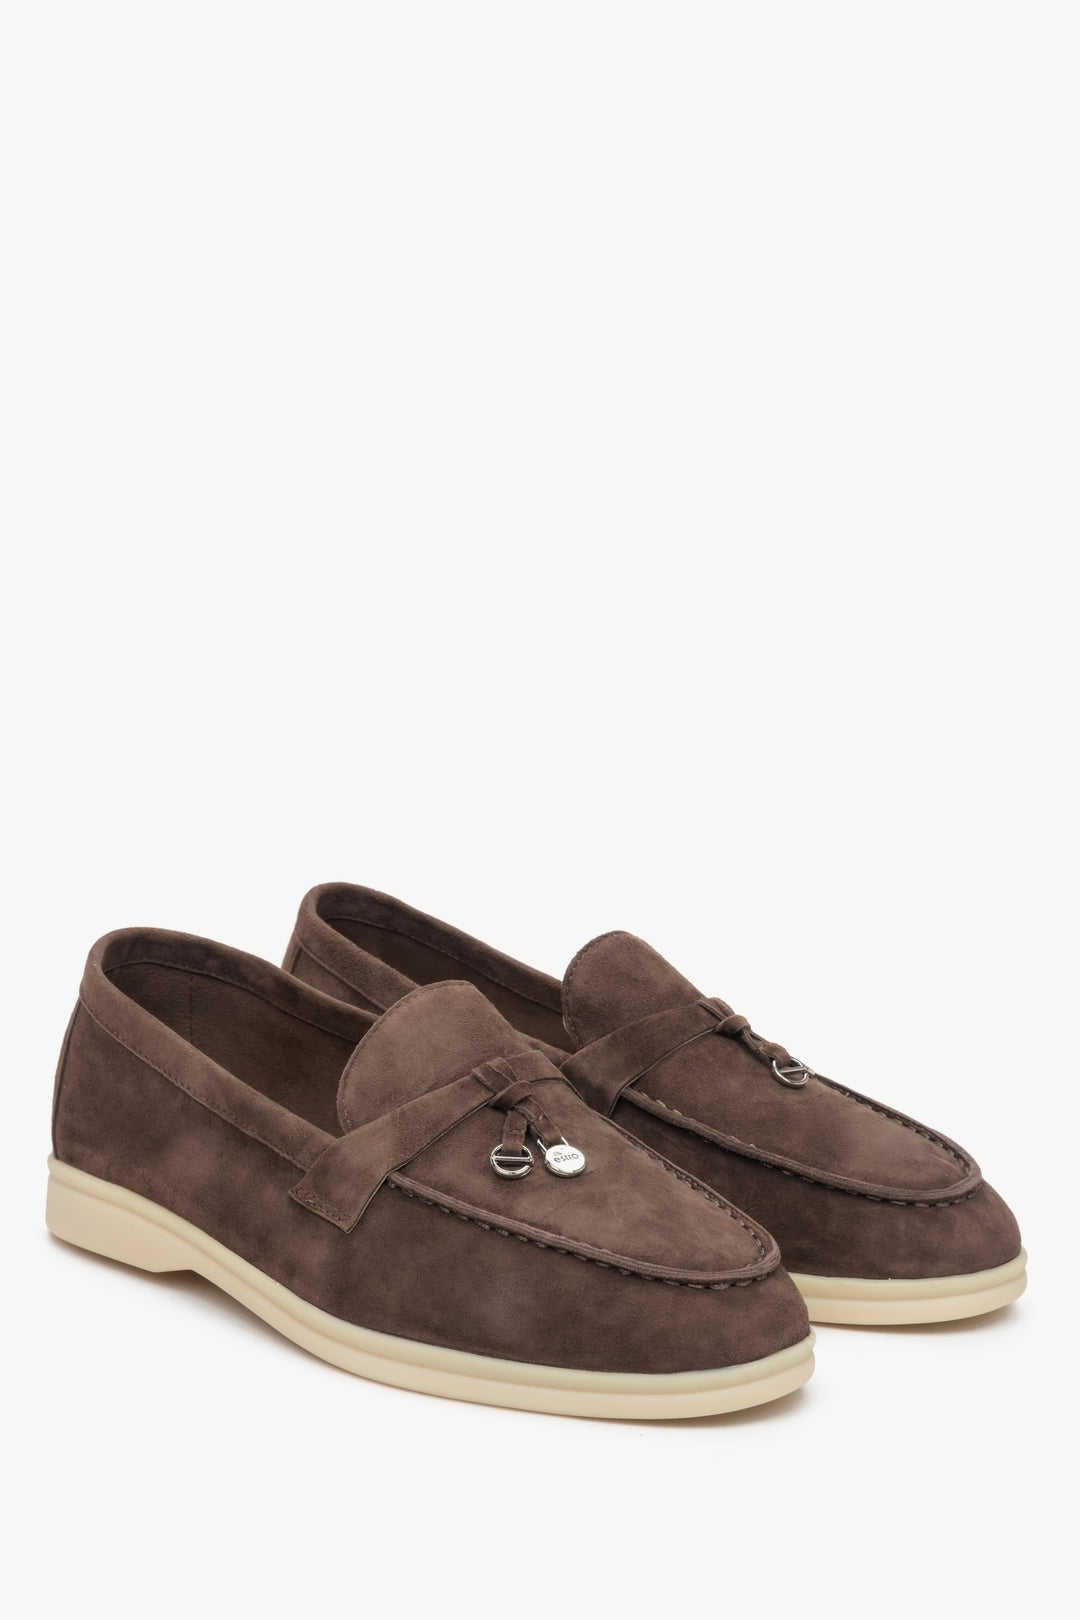 Saddle brown velour women's slip on loafers,